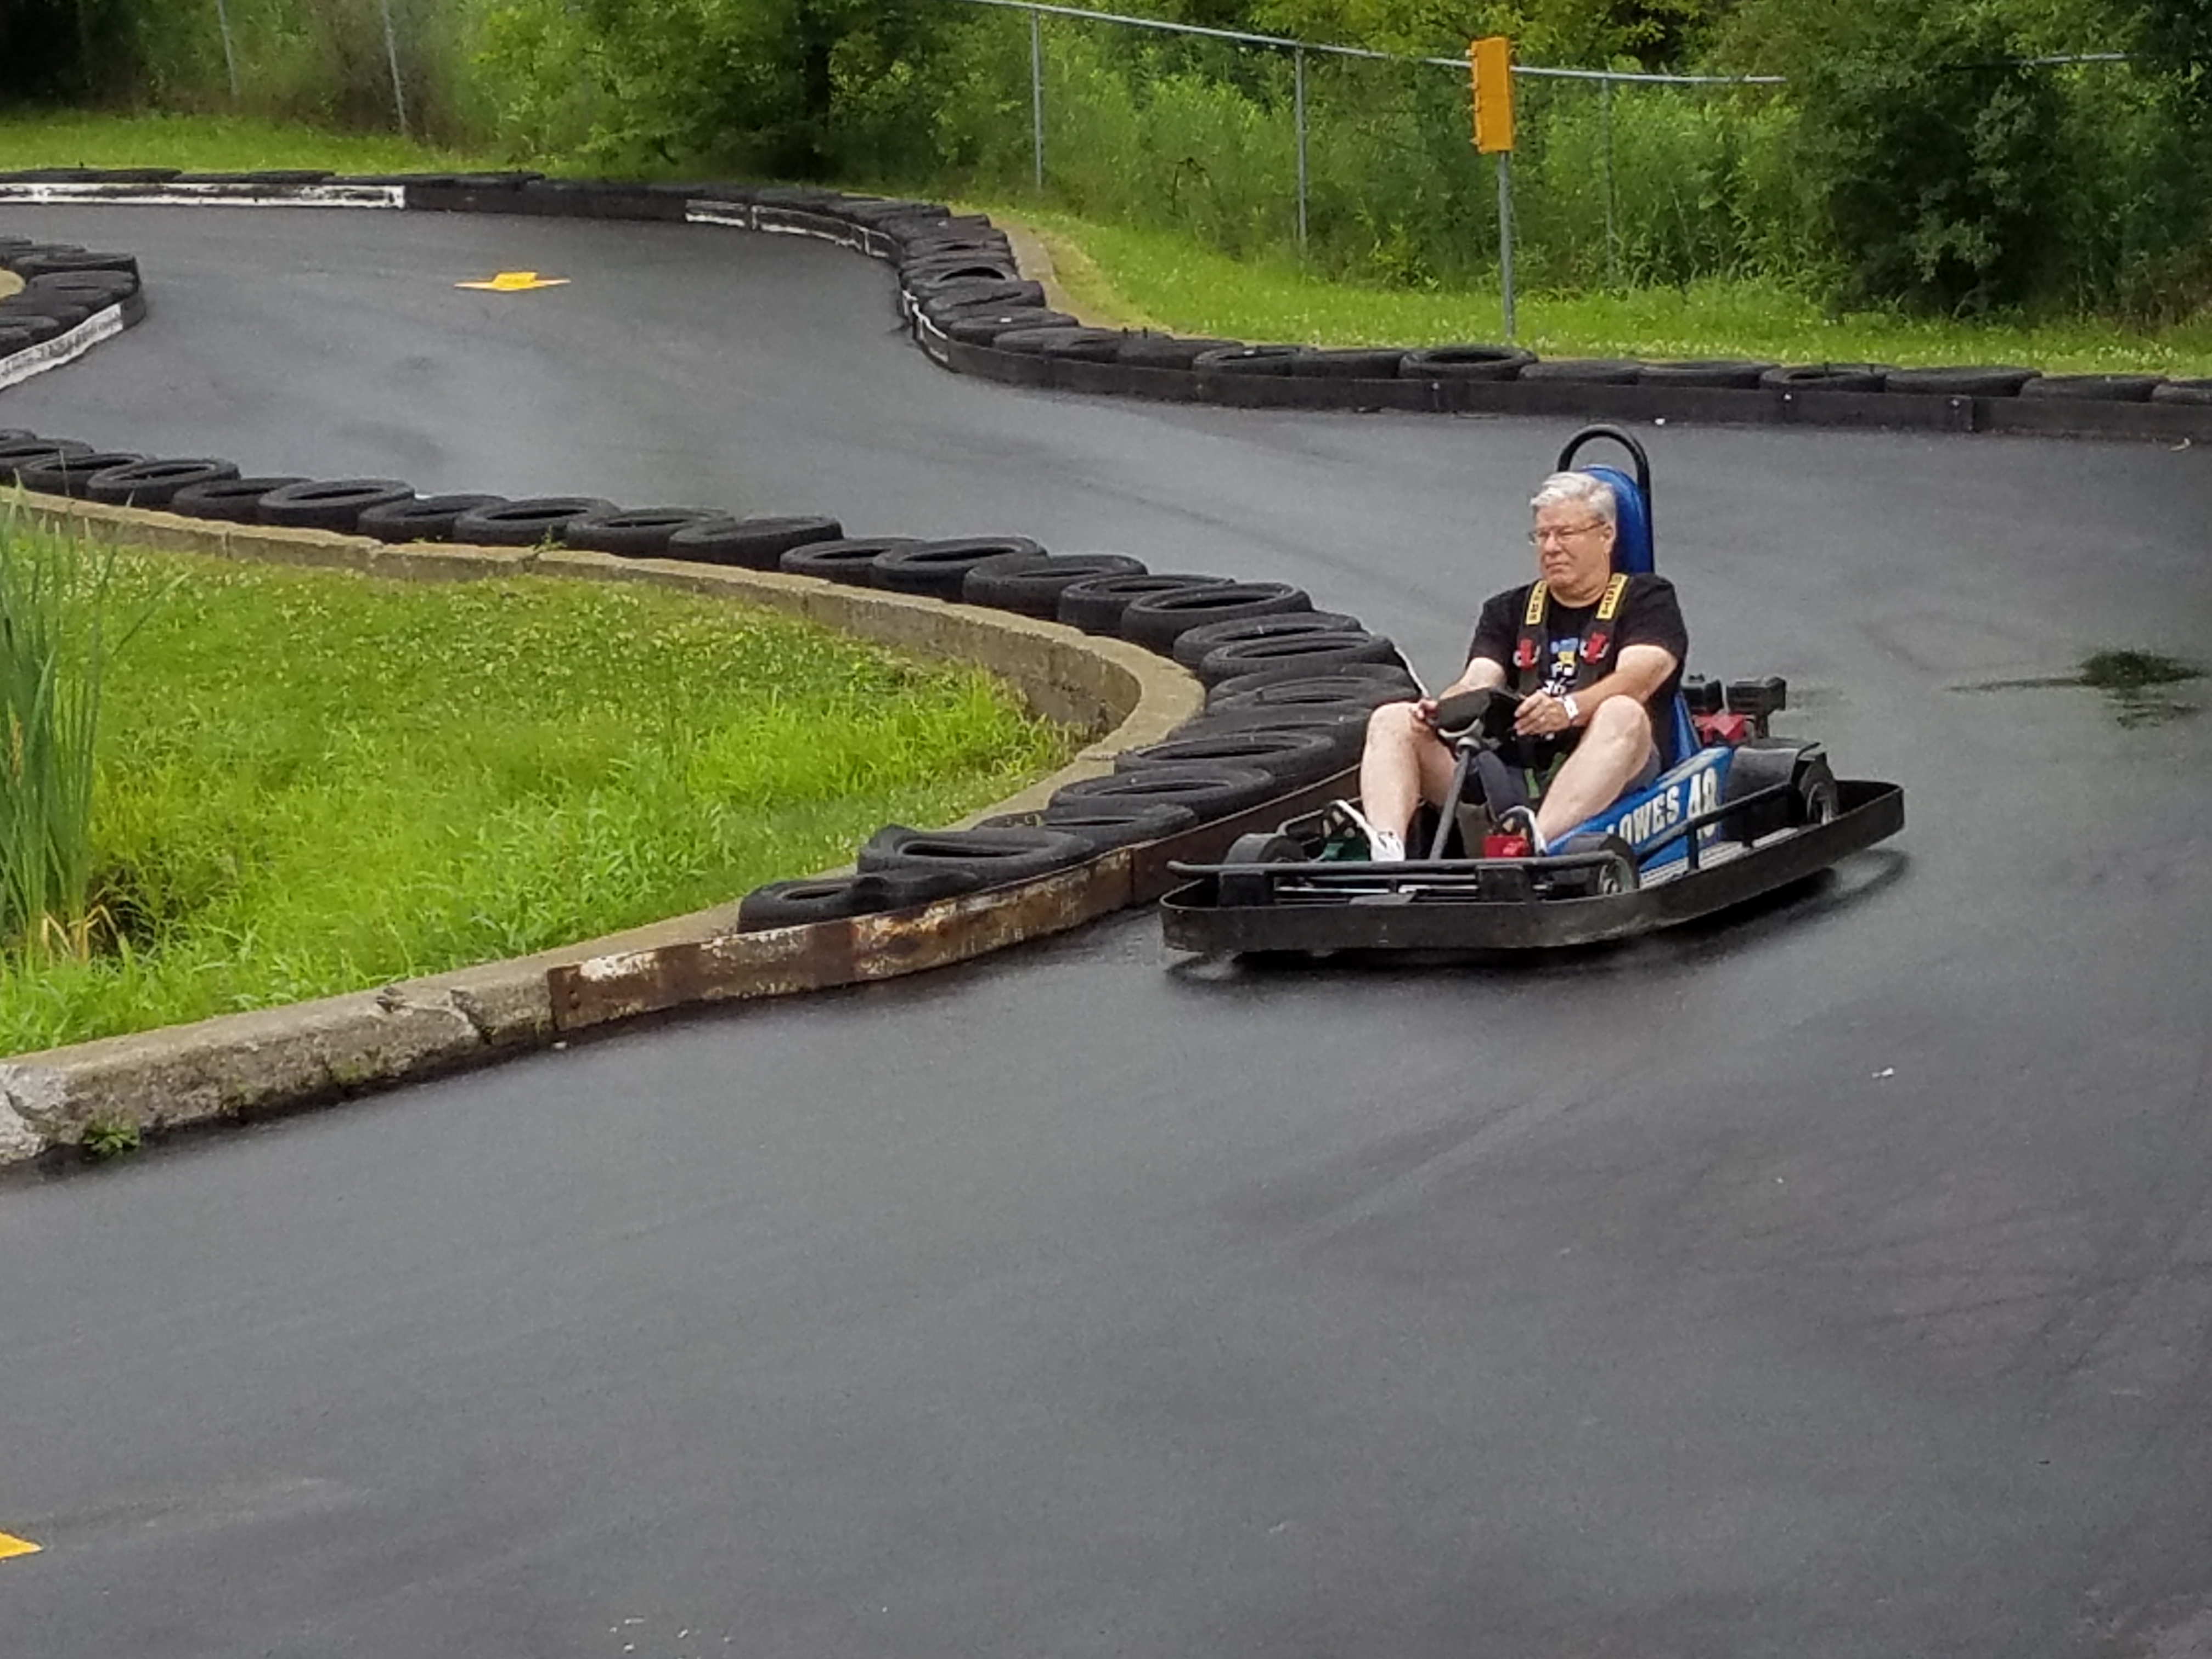 Go Karting at the 2017 Summer Outing